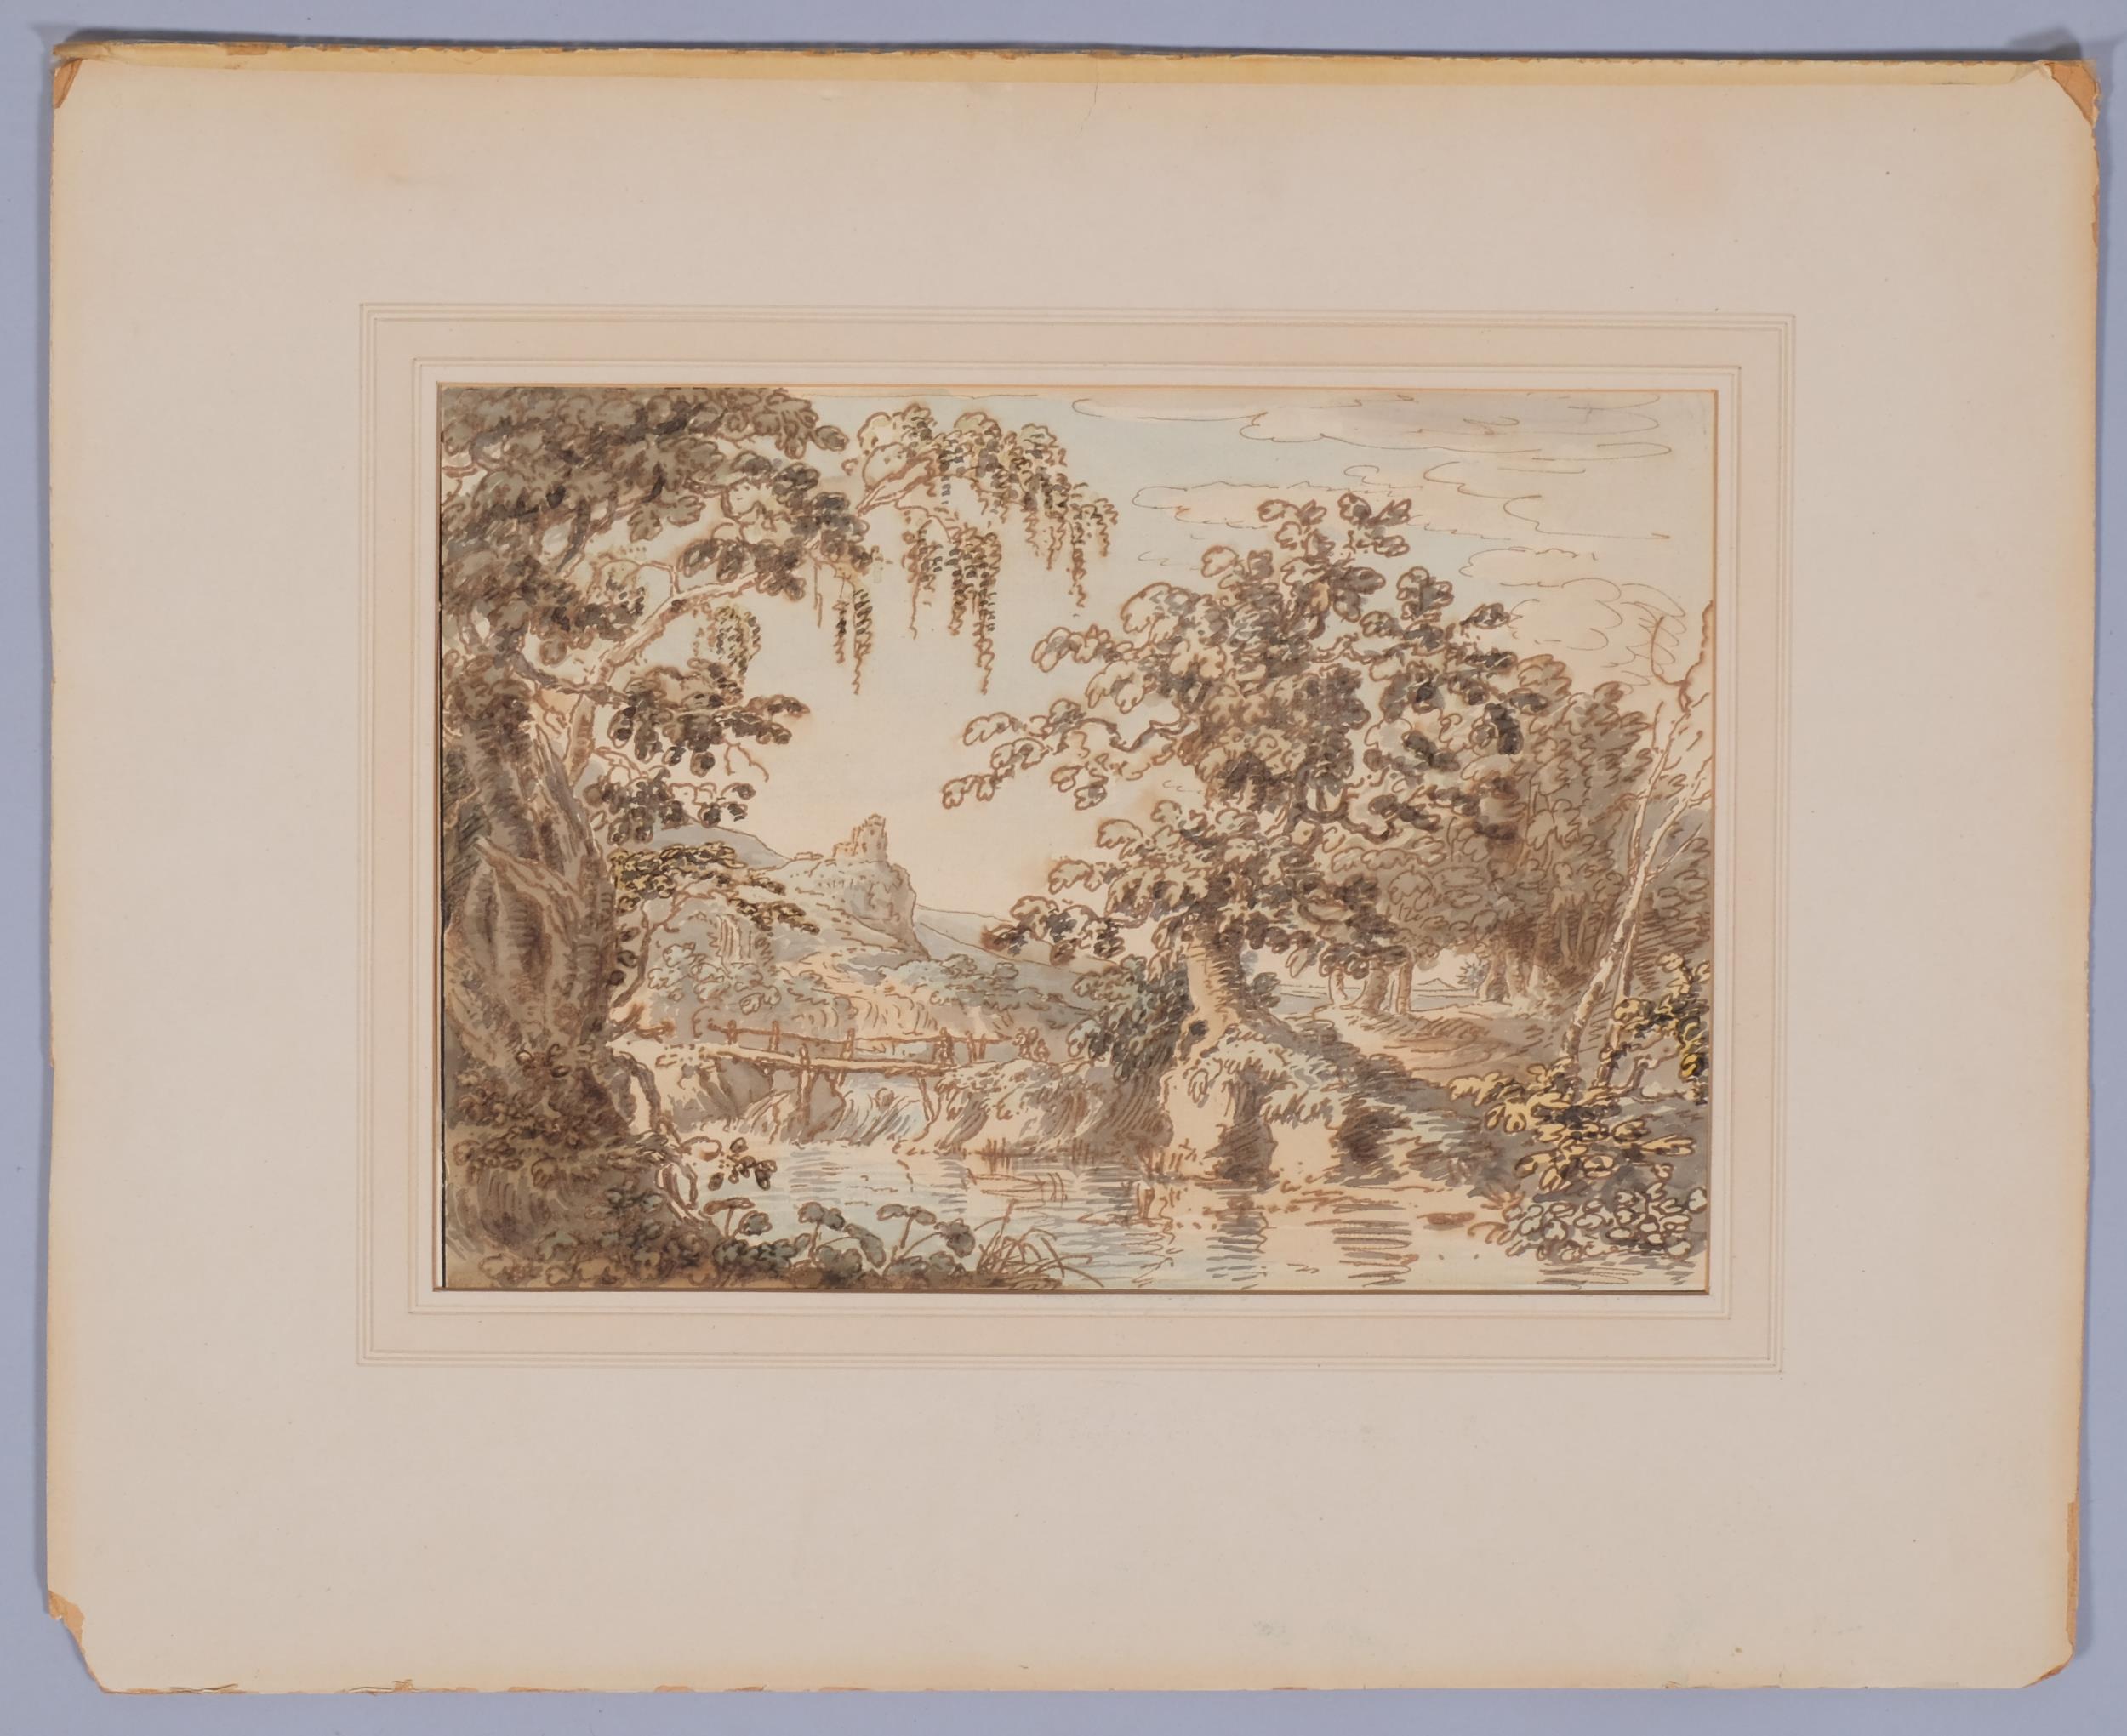 Attributed to George Cruikshank (1792 - 1878), landscape, ink and watercolour, unsigned, 22cm x